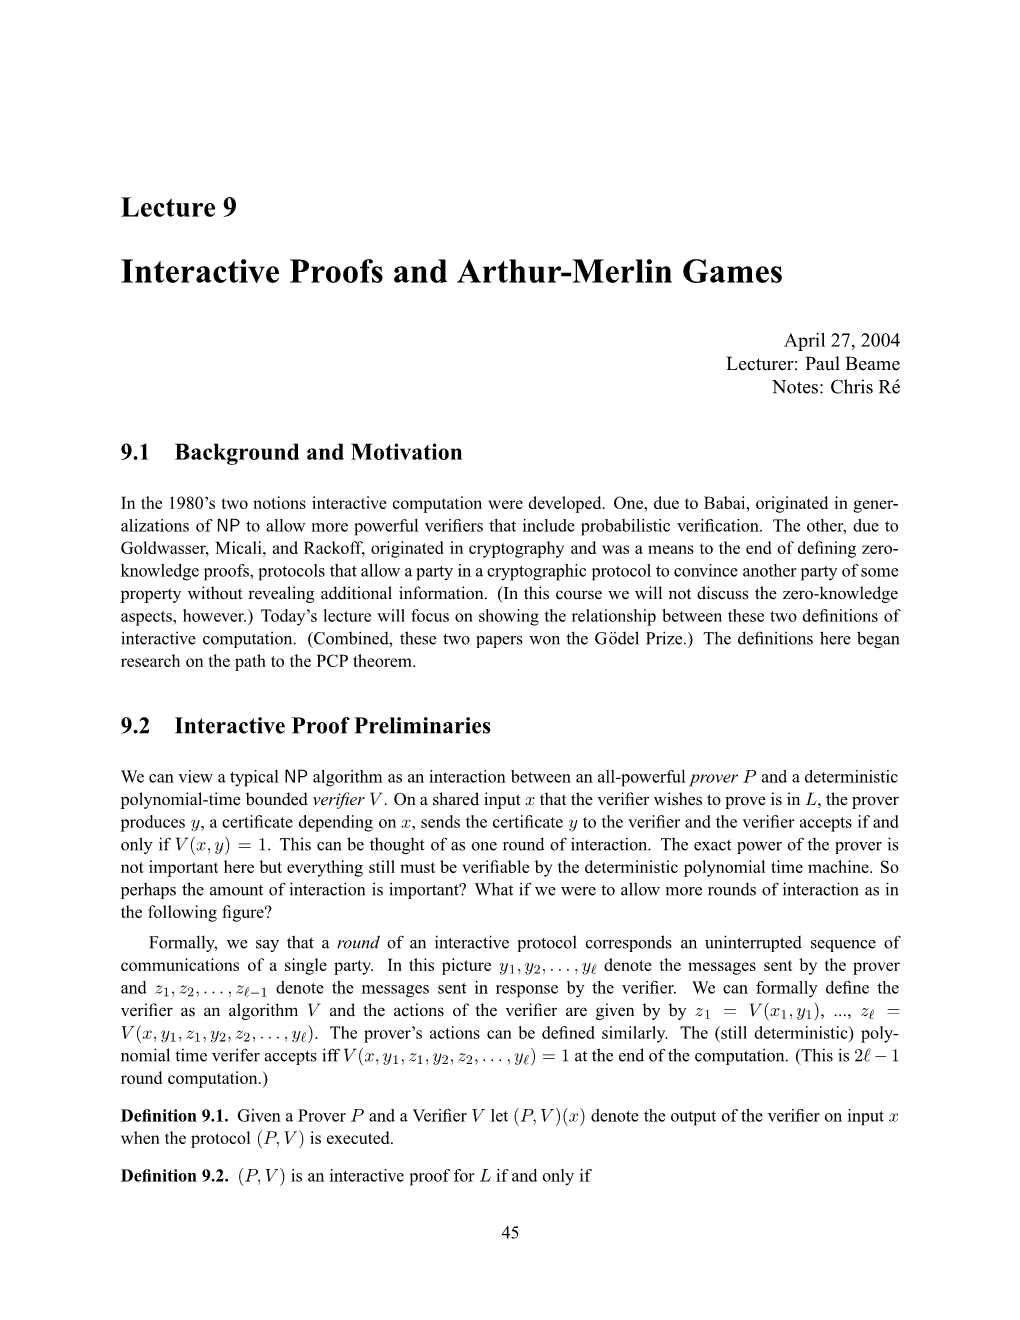 Lecture 9 Interactive Proofs and Arthur-Merlin Games